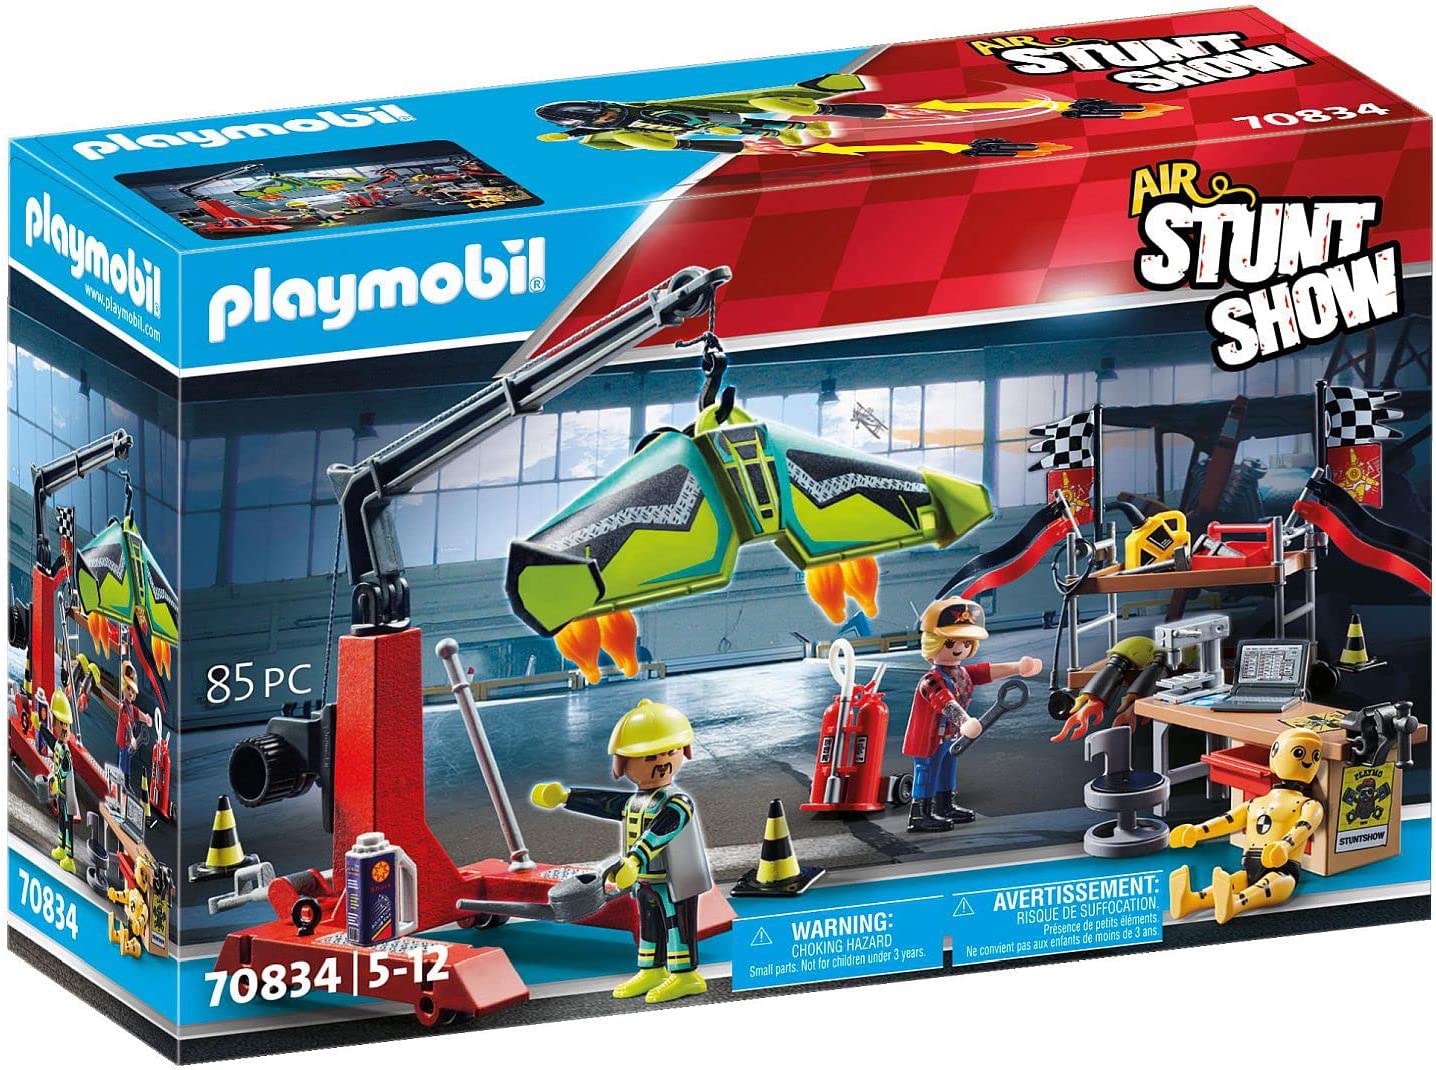 PLAYMOBIL Air Stunt Show 70834 Service Station with Crane, with Winch and Trailer Hitch and Wingsuit with Carry Frame, for Children Aged 5 and Up